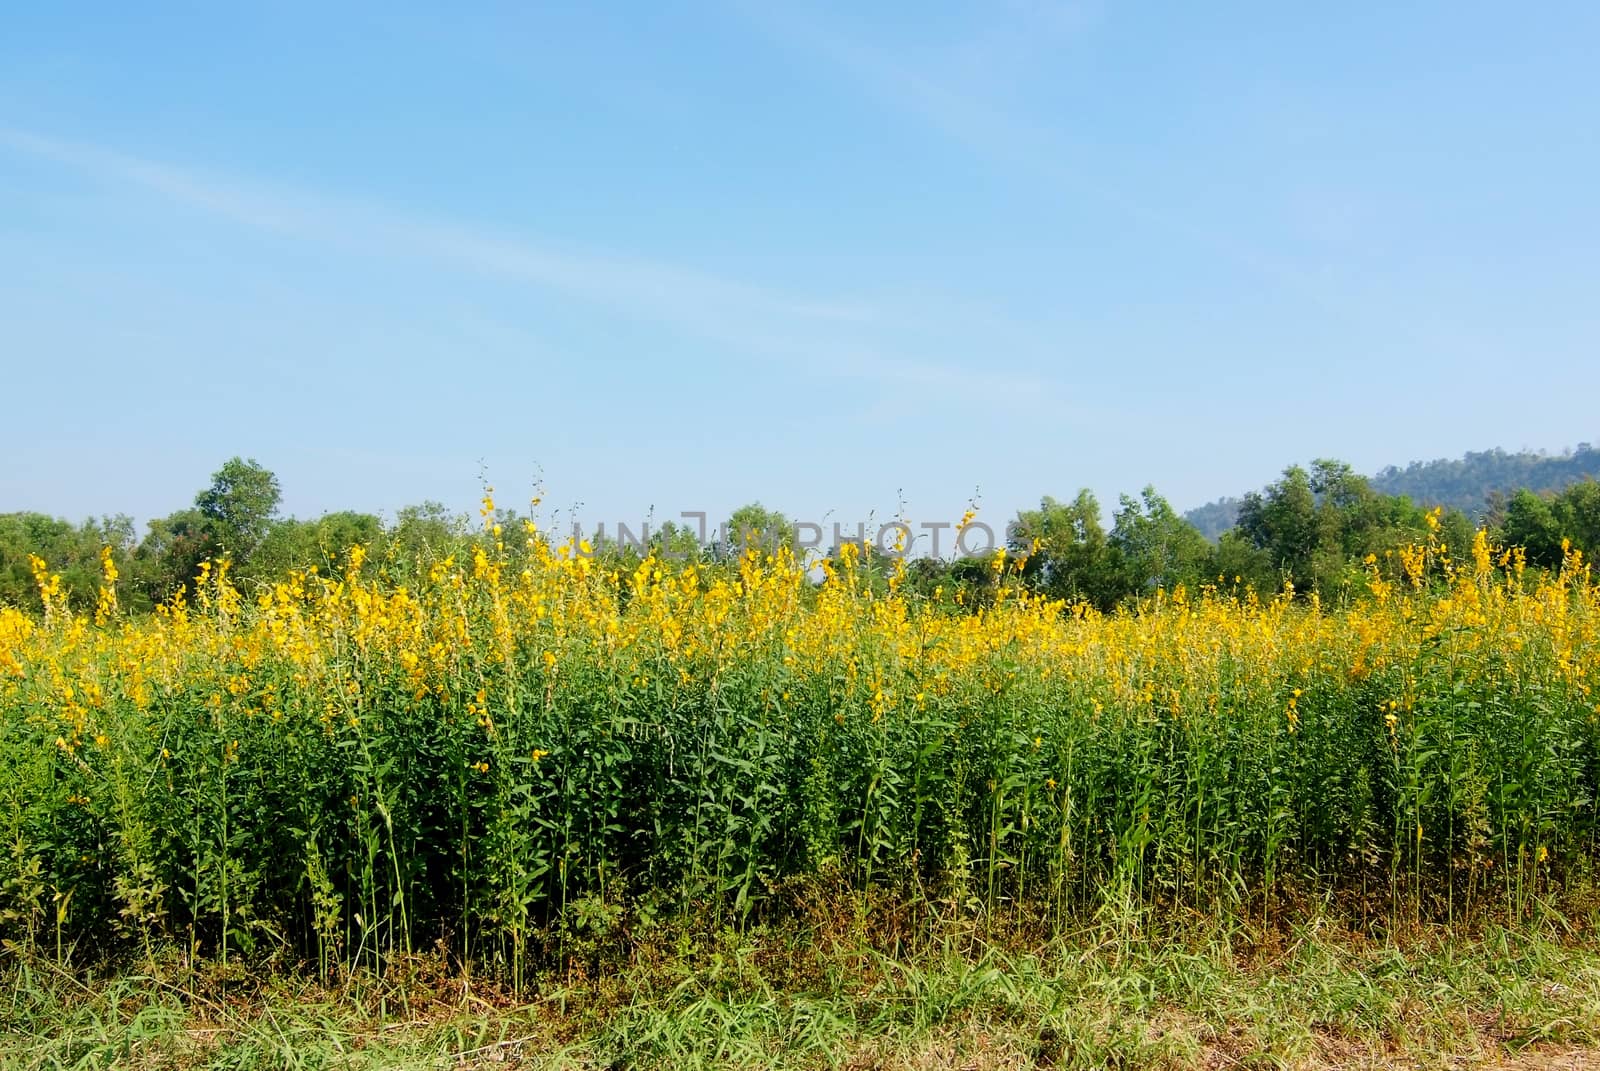 Farm Sunn Hemp flowers, Indian hemp flower field, Madras hemp or Crotalaria juncea is a tropical Asian plant used for green manure forage, organic soil building and cover crop applications